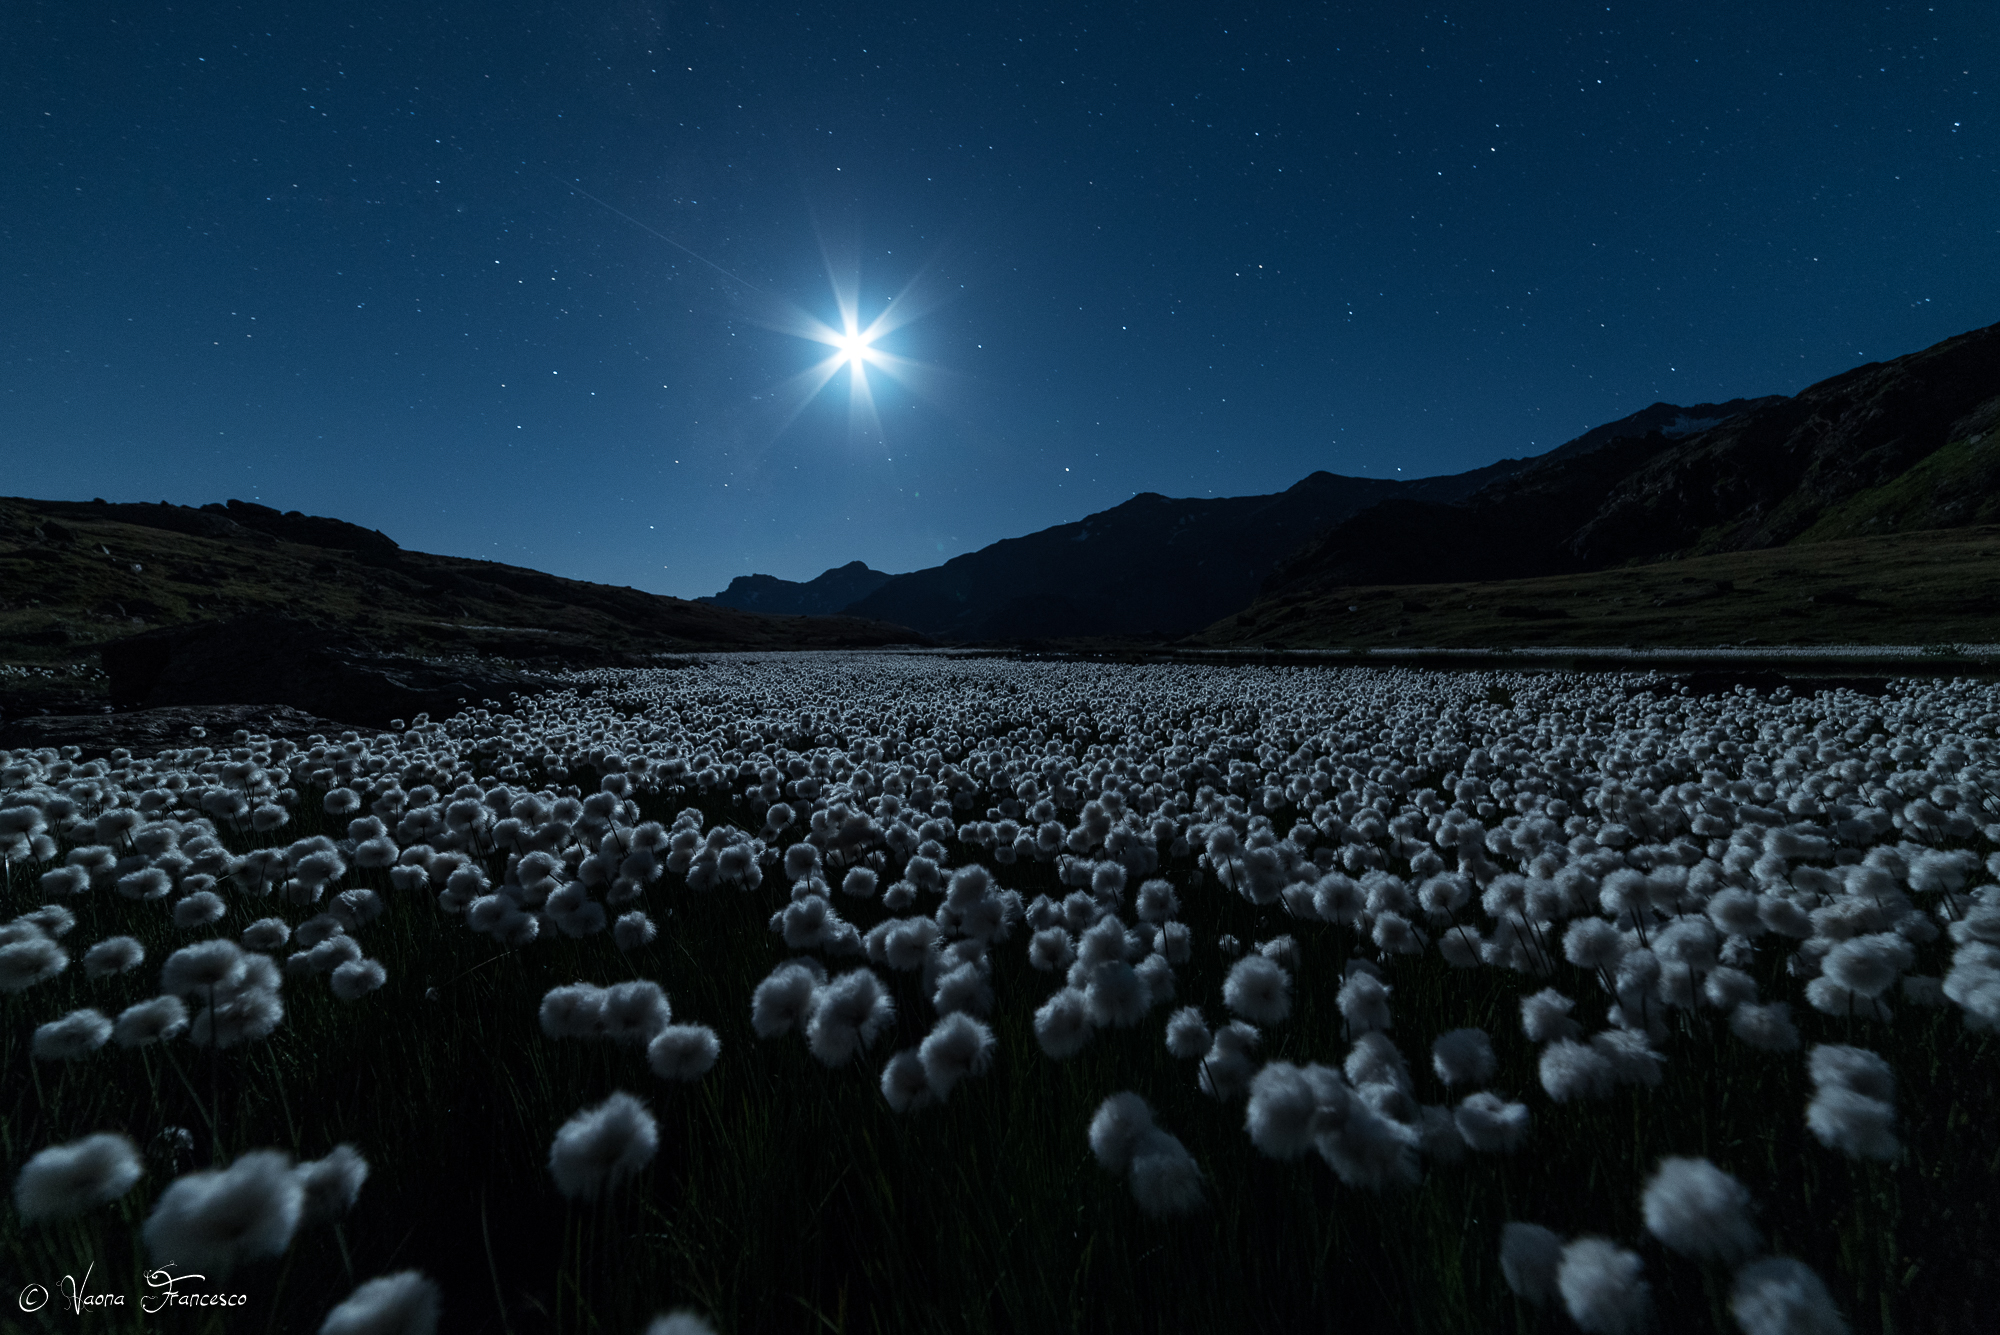 Cotton grass in the moonlight...